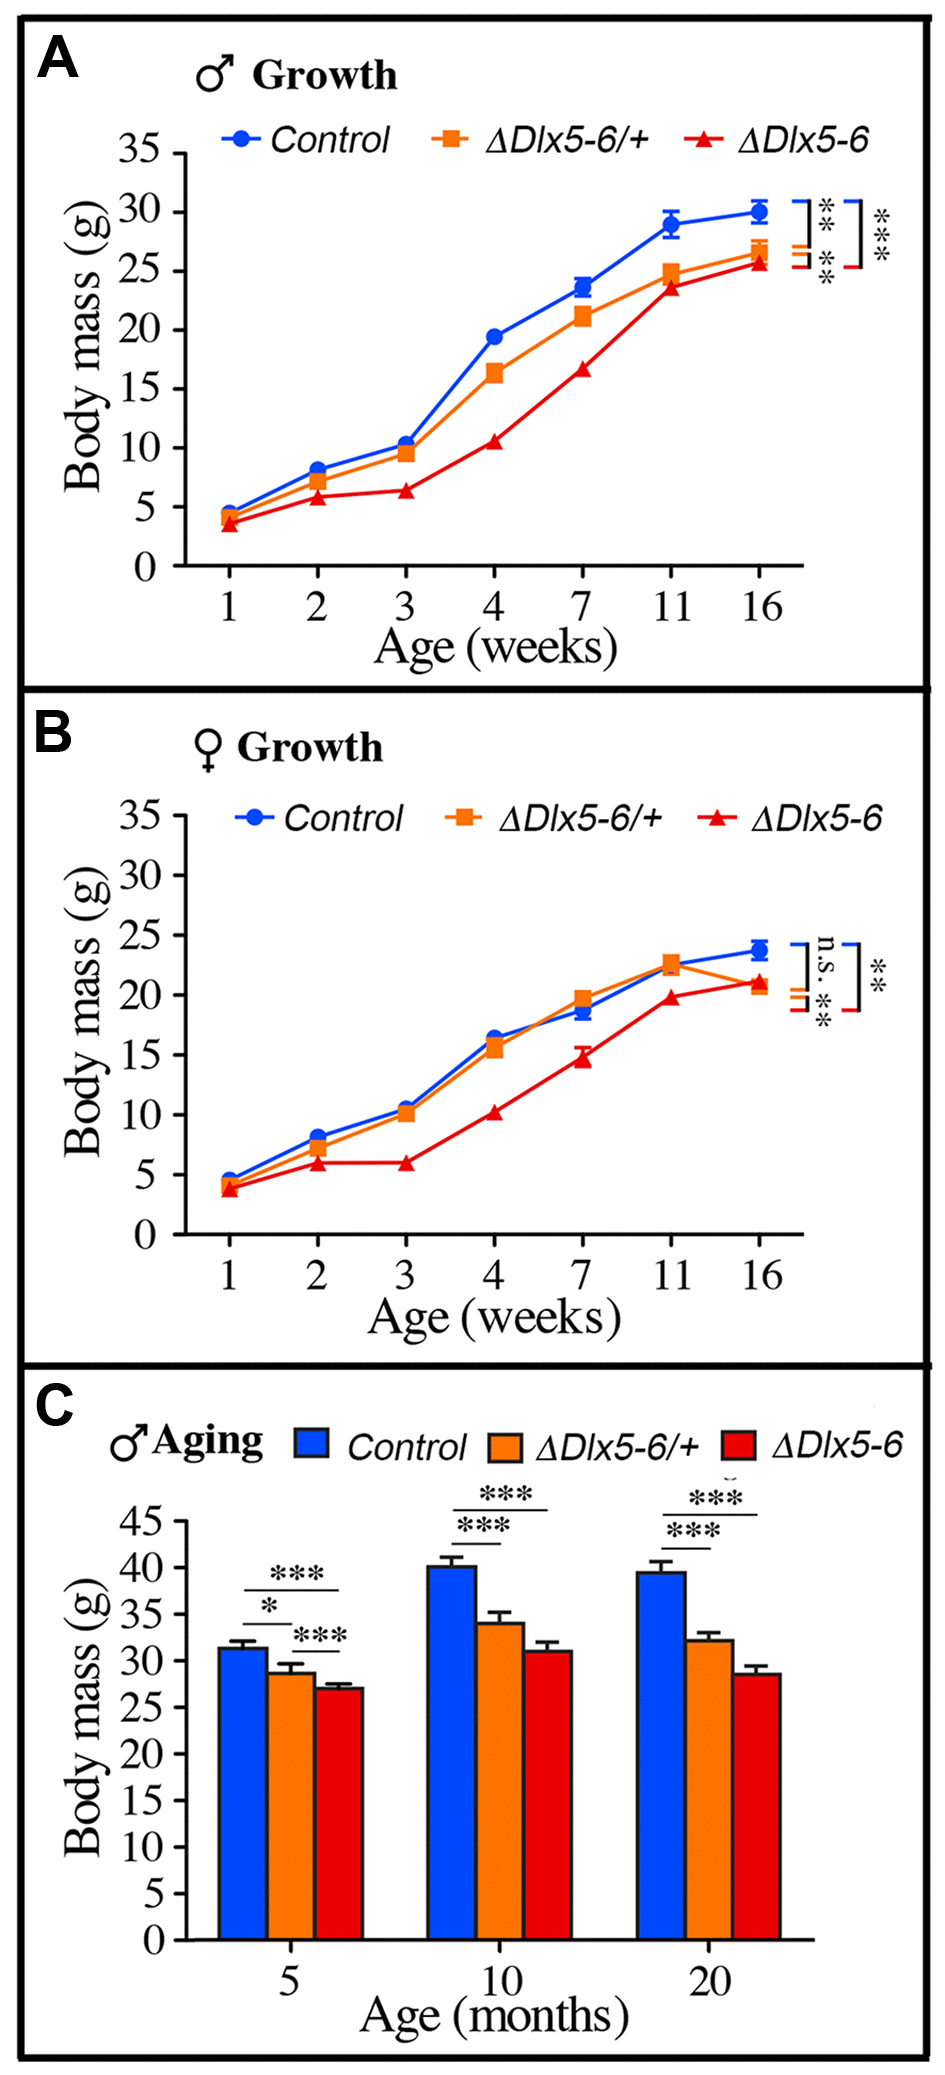 Weight measures during growth and aging. (A-B) The body weight of cohorts of male (A) and female (B) control, VgatΔDlx5-6/+ and VgatΔDlx5-6 mice was measured during the first 16 weeks of growth. At all time points, VgatΔDlx5-6 mice (male and female) displayed a significant weight reduction; VgatΔDlx5-6/+ males had also a significantly lower weight, while, during growth, until 11 weeks of age, the weight of female VgatΔDlx5-6/+was not significantly different than controls (B). (C) The body weight of a cohorts of male control, VgatΔDlx5-6/+ and VgatΔDlx5-6 mice (n ≥ 8 per group) was measured during the first 20 months of aging. At all time points analyzed VgatΔDlx5-6/+ and VgatΔDlx5-6 male mice presented a highly significant weight reduction.